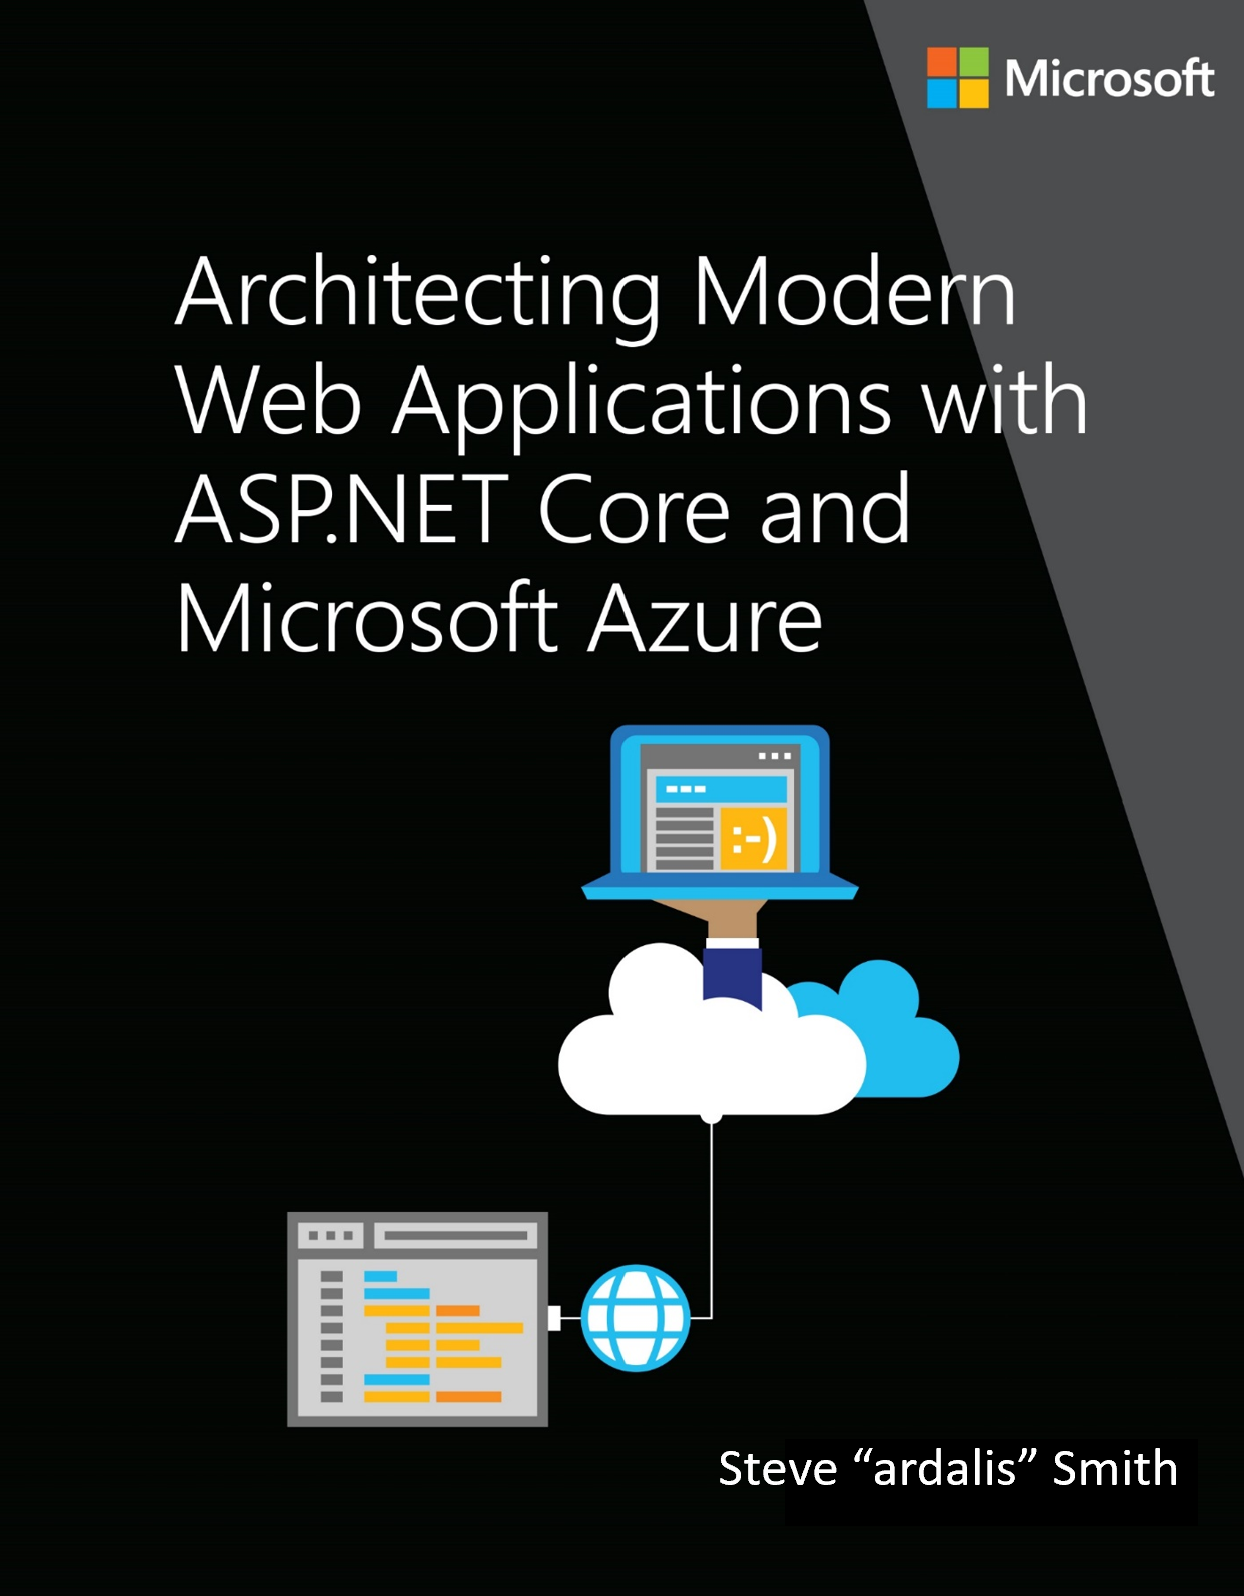 Book cover image of the Architect Modern Web Applications guide.